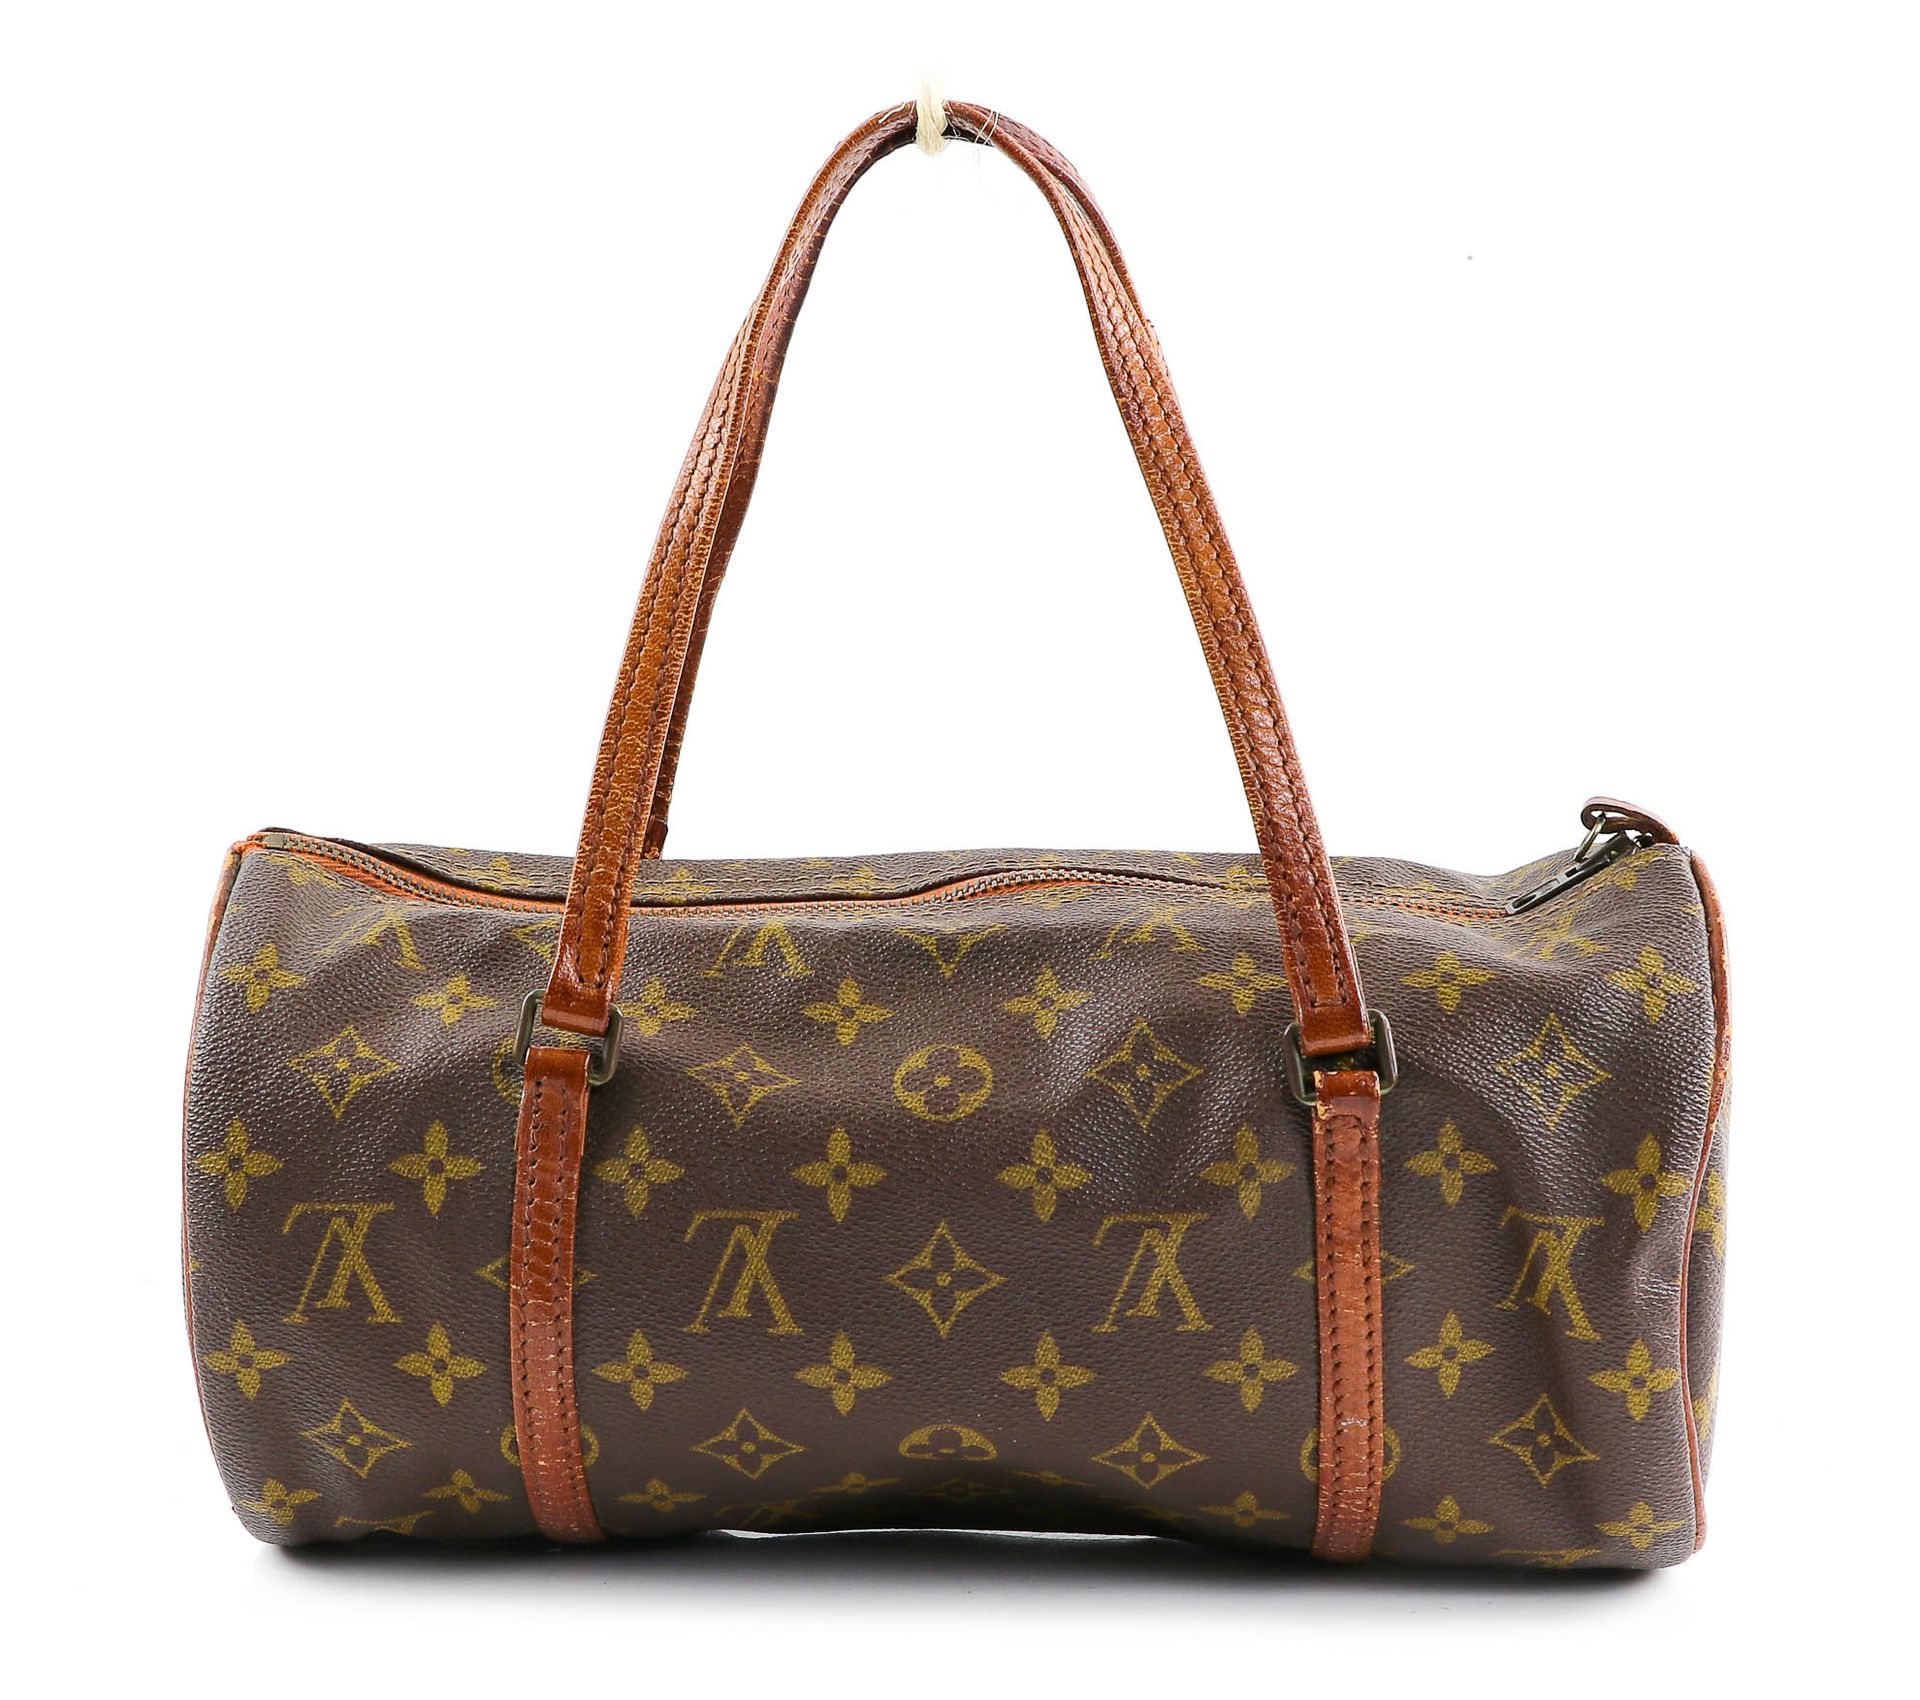 Null Louis VUITTON - "Papillon" bag in monogrammed canvas and brown leather - Do&hellip;